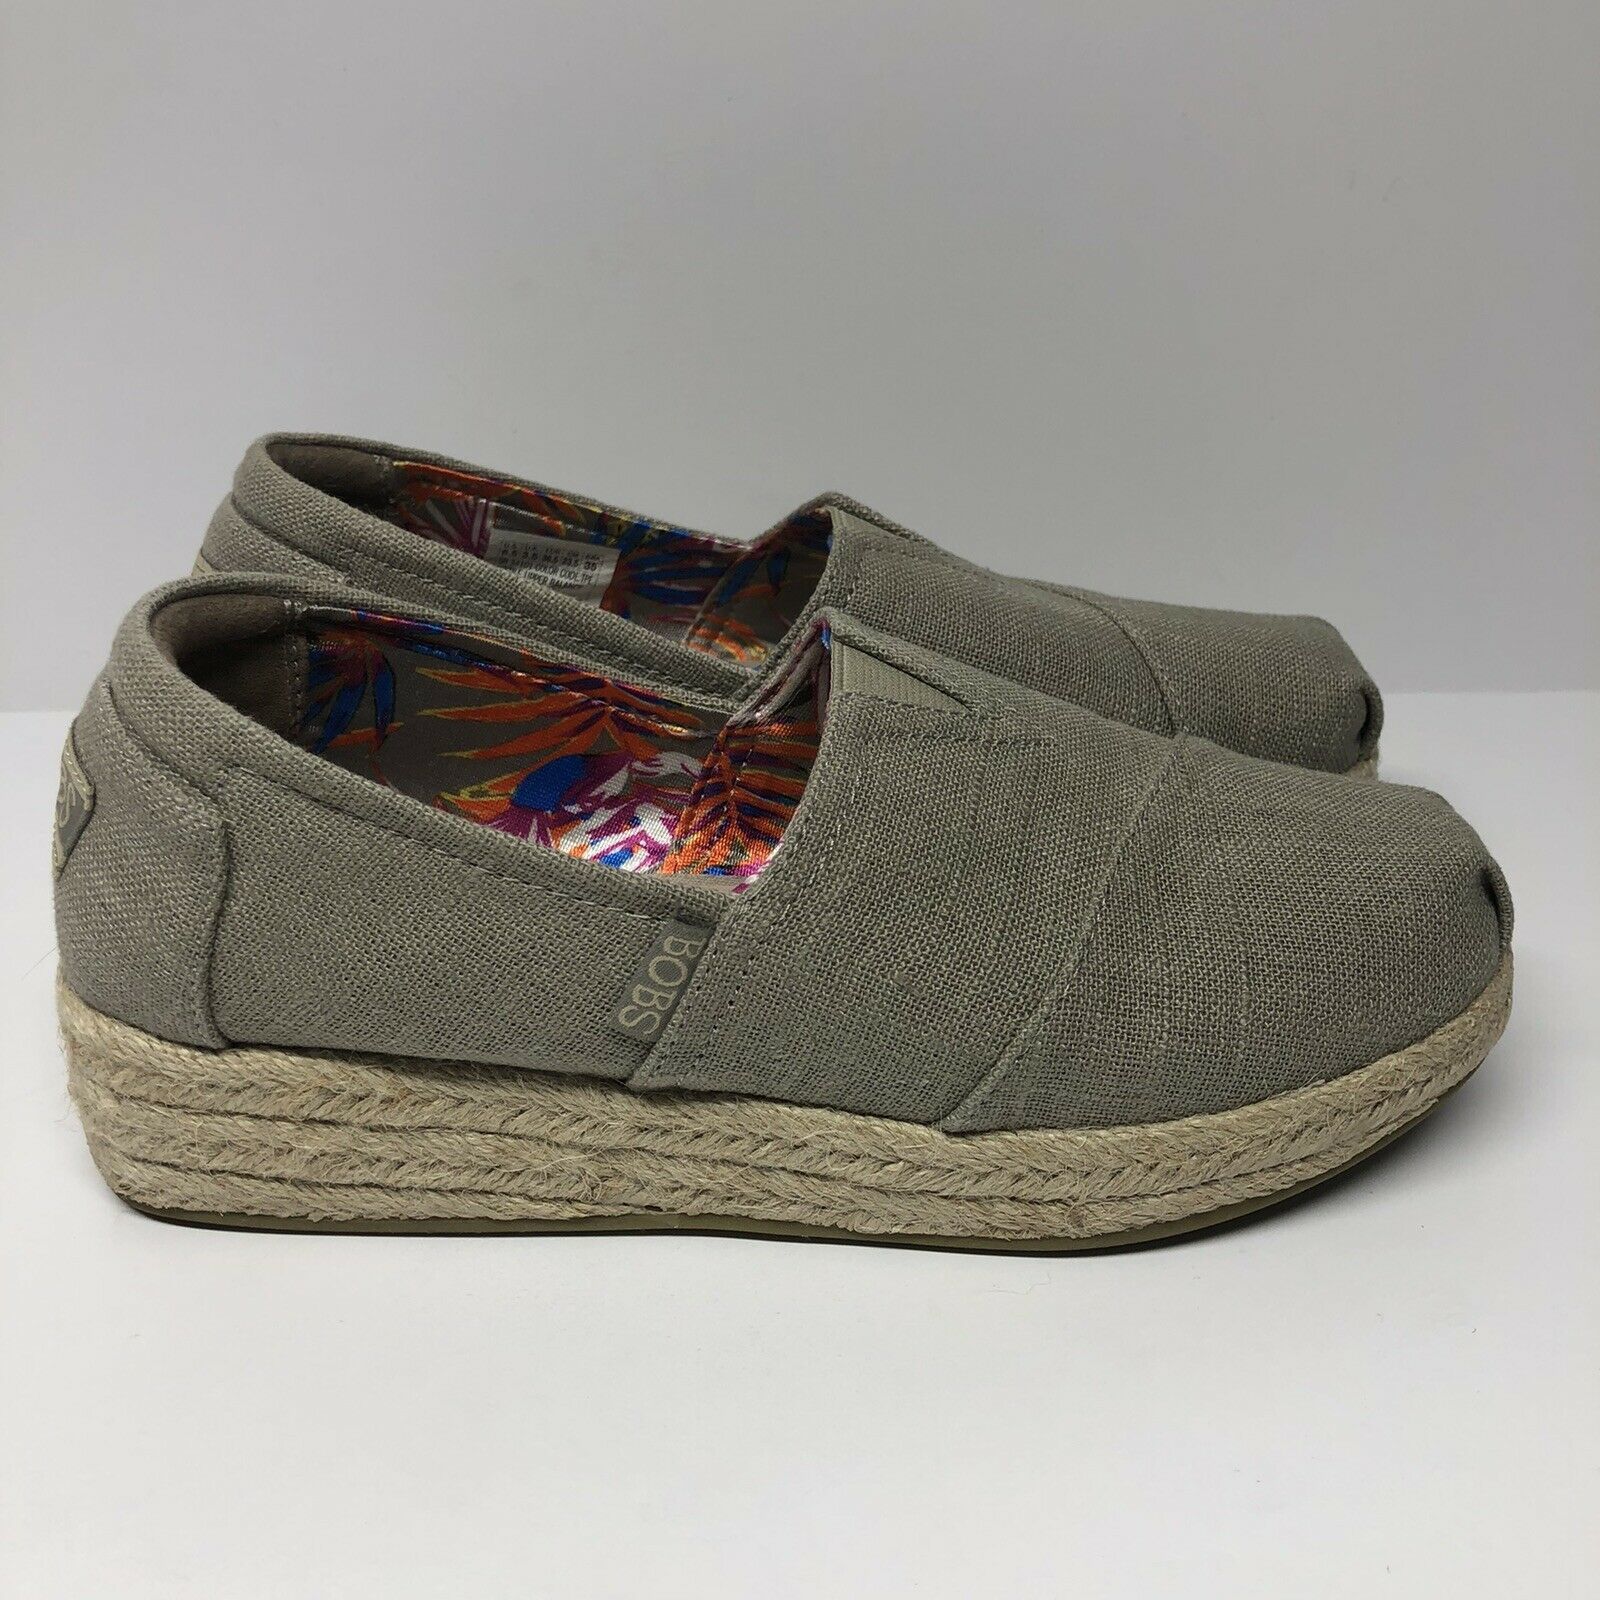 Skechers BOBS Shoes Slip On Canvas 